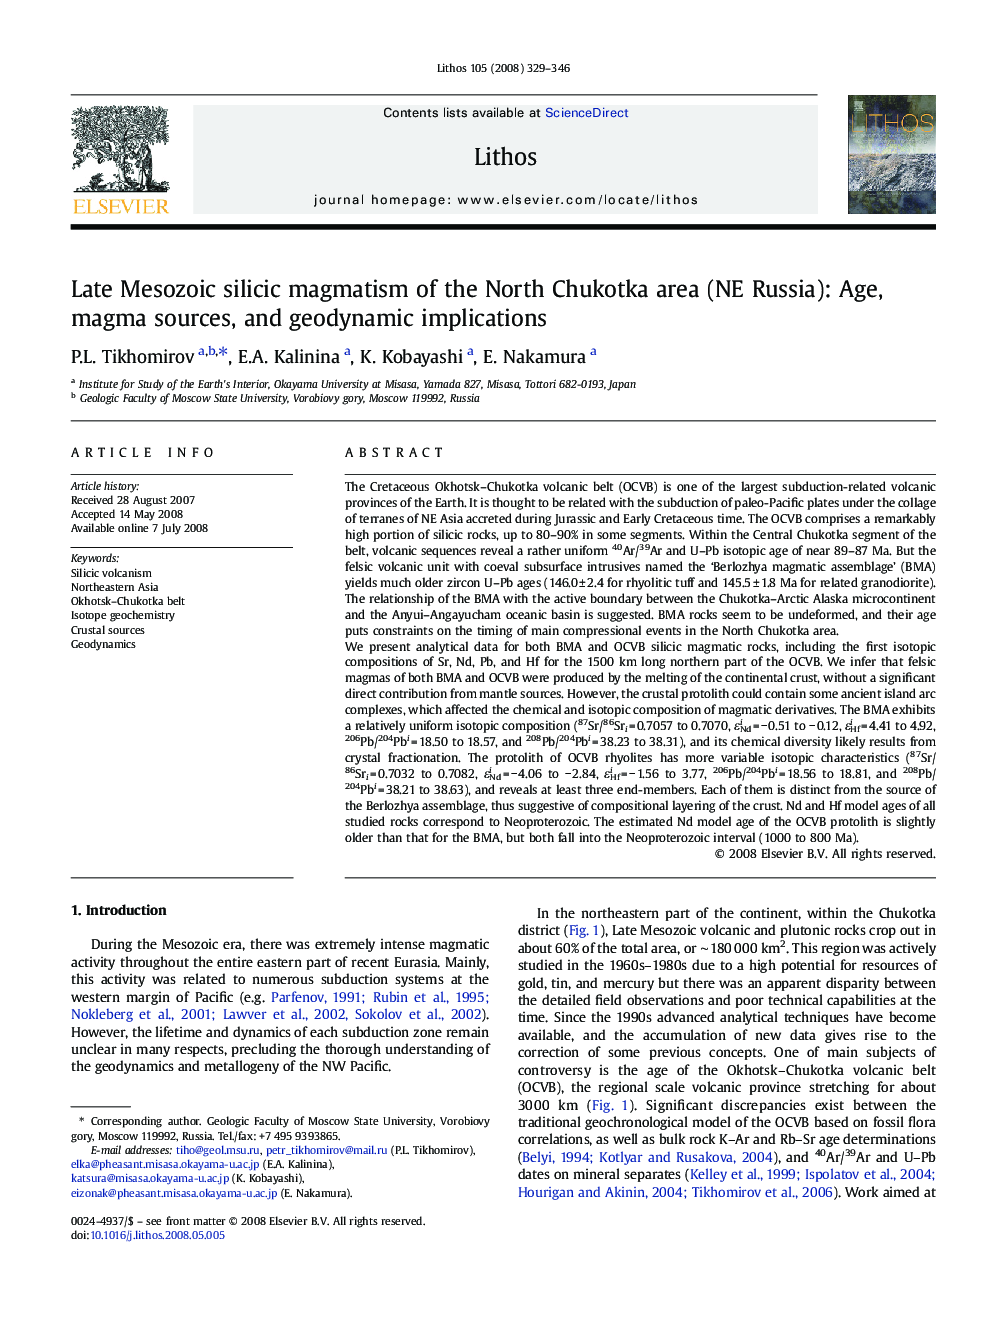 Late Mesozoic silicic magmatism of the North Chukotka area (NE Russia): Age, magma sources, and geodynamic implications